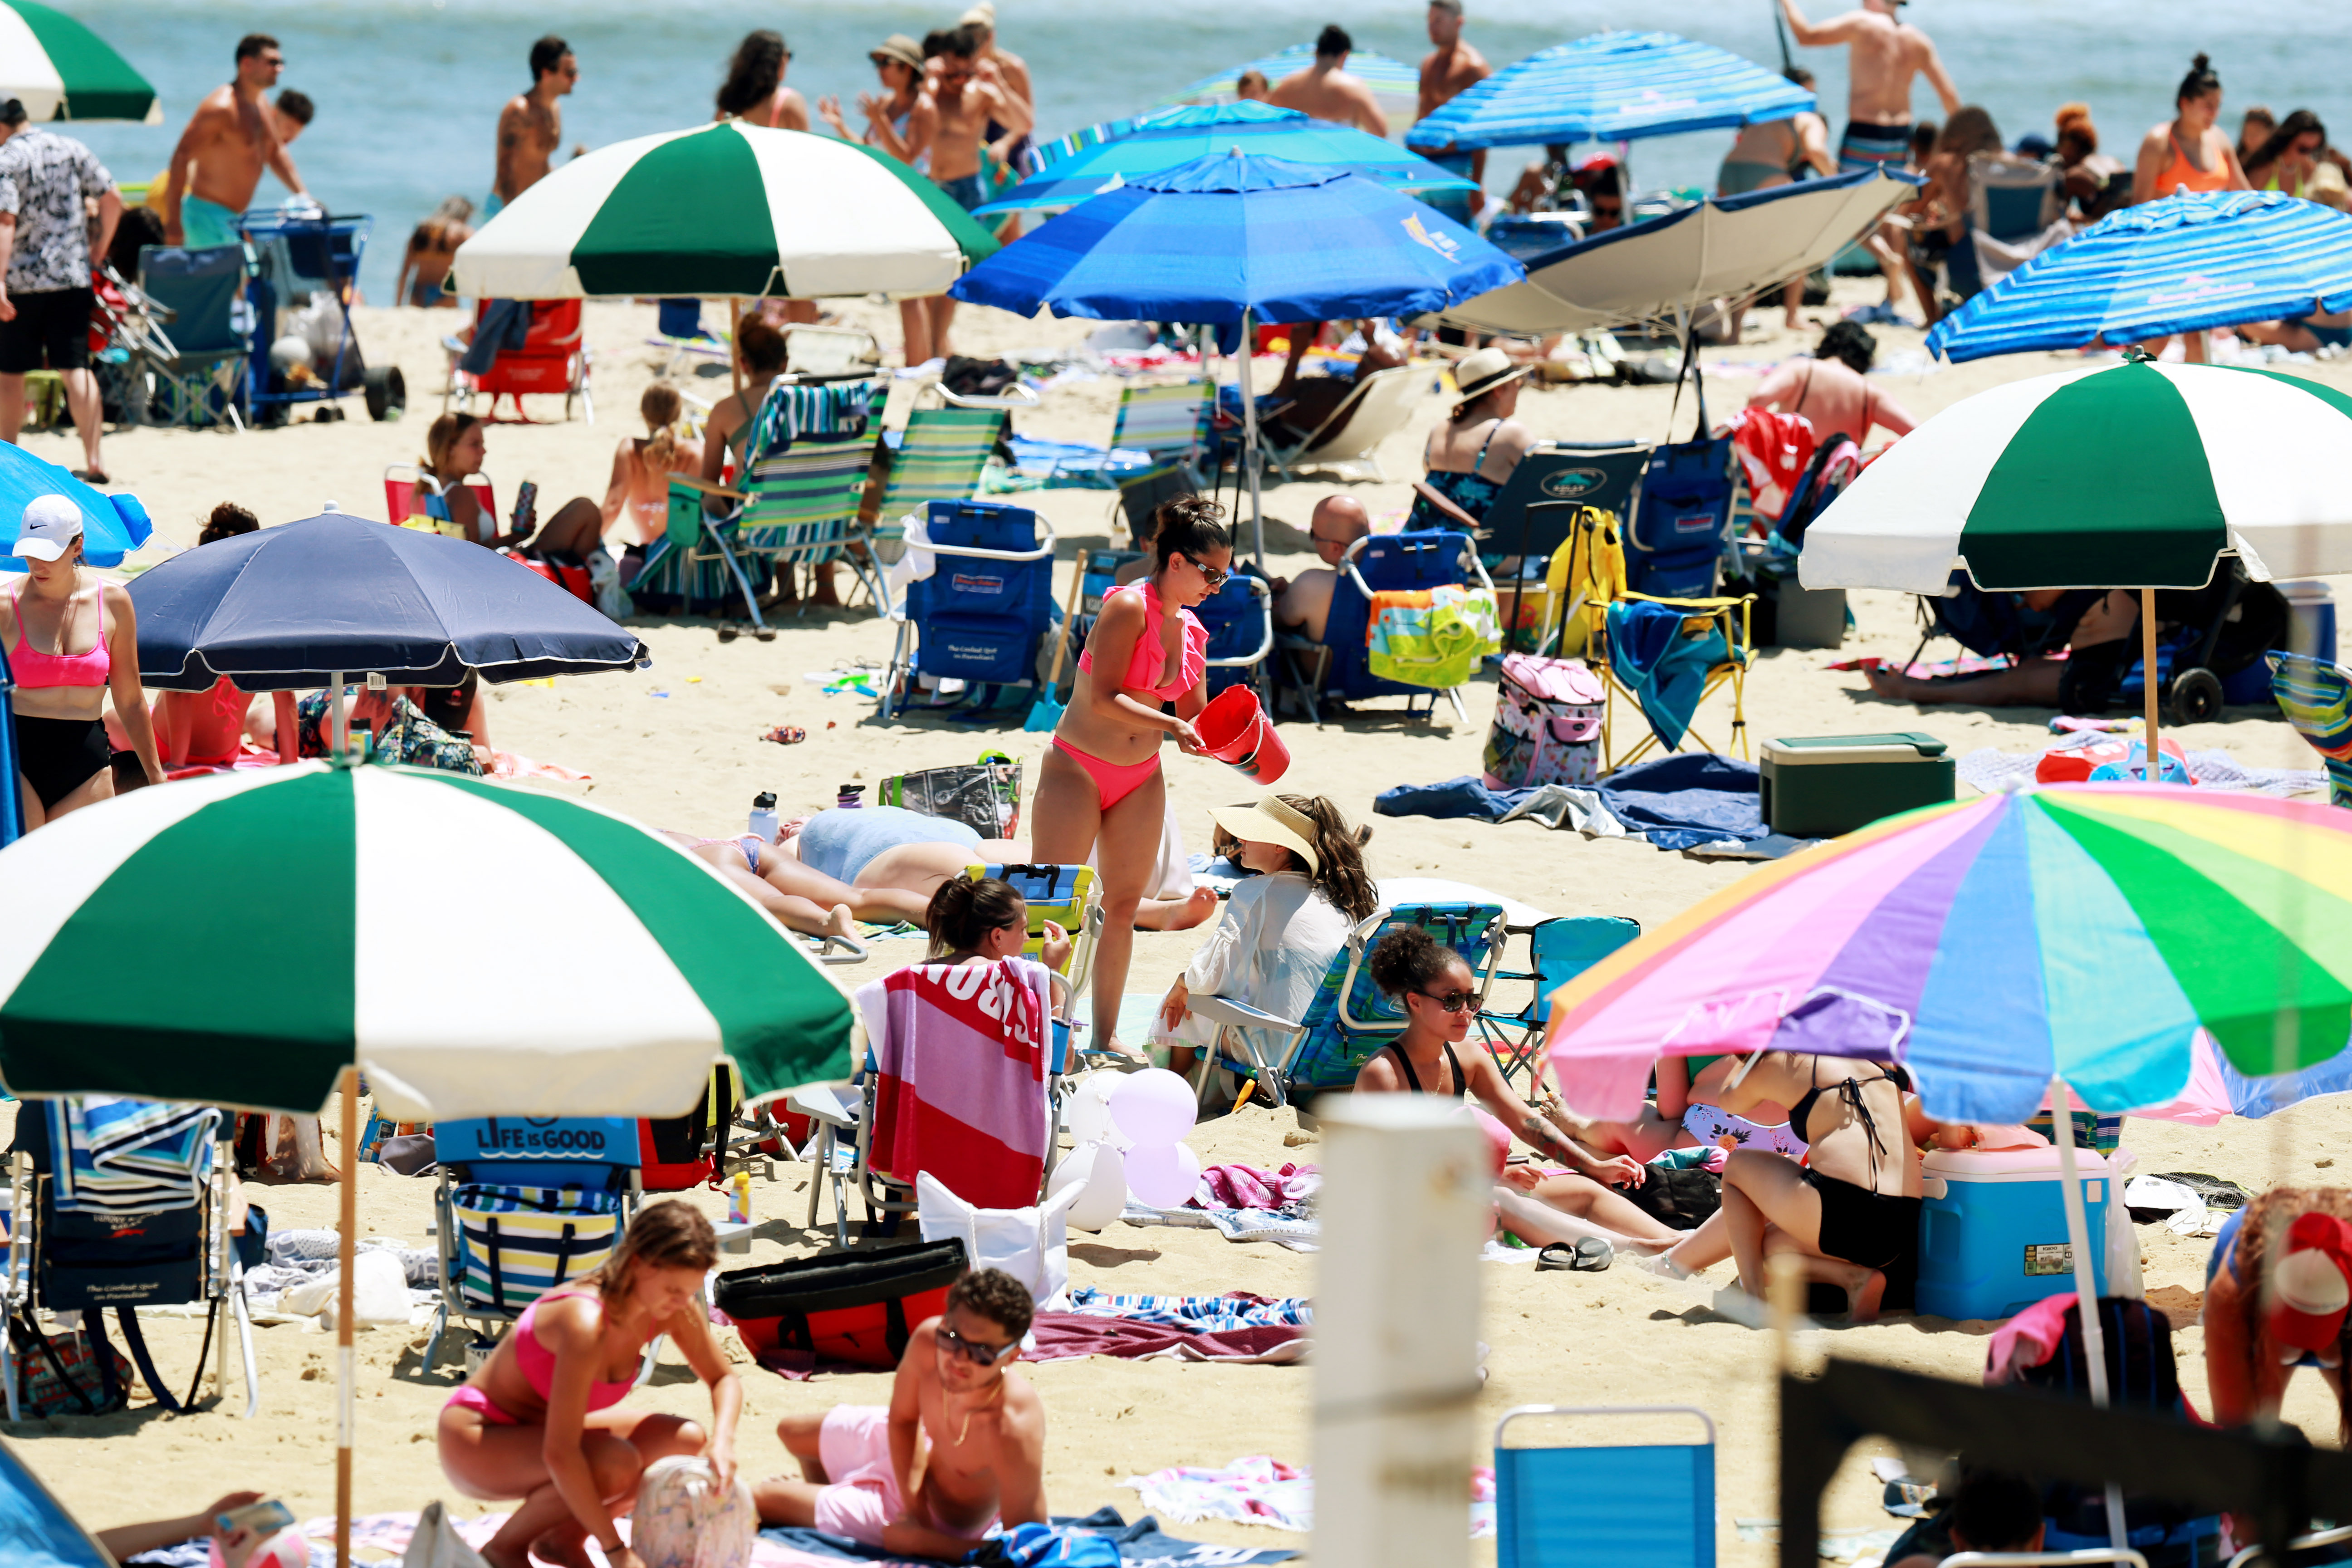 The beach in Long Branch, N.J. on Sunday, July, 12, 2020 